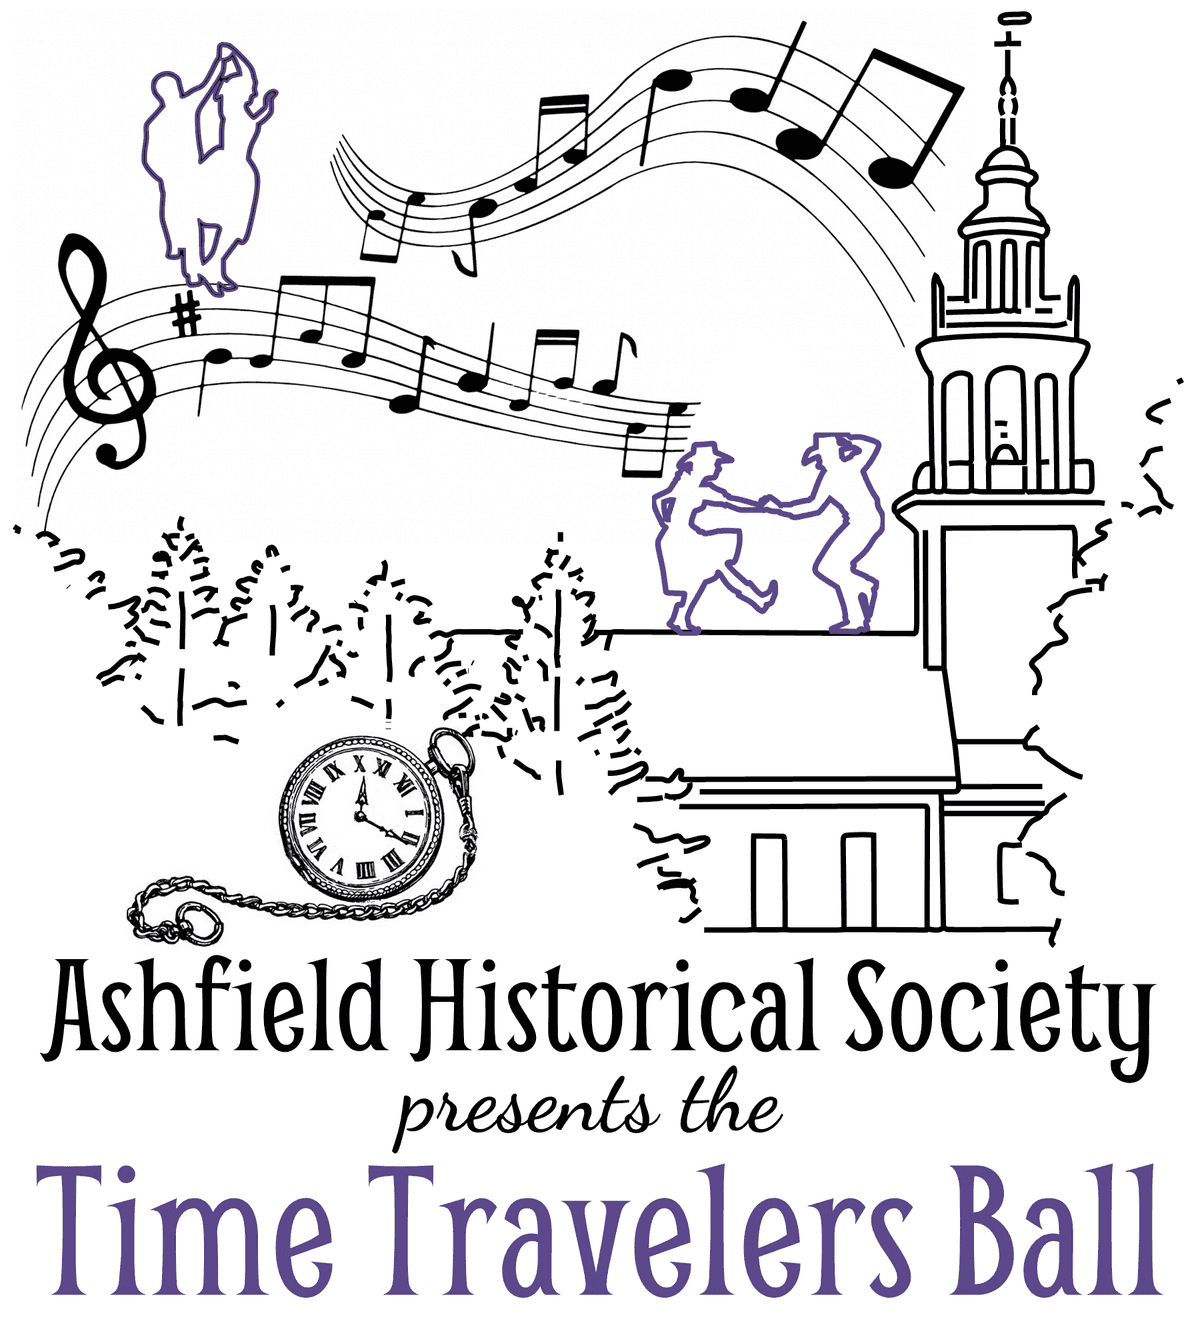 Time Travelers Ball event
page